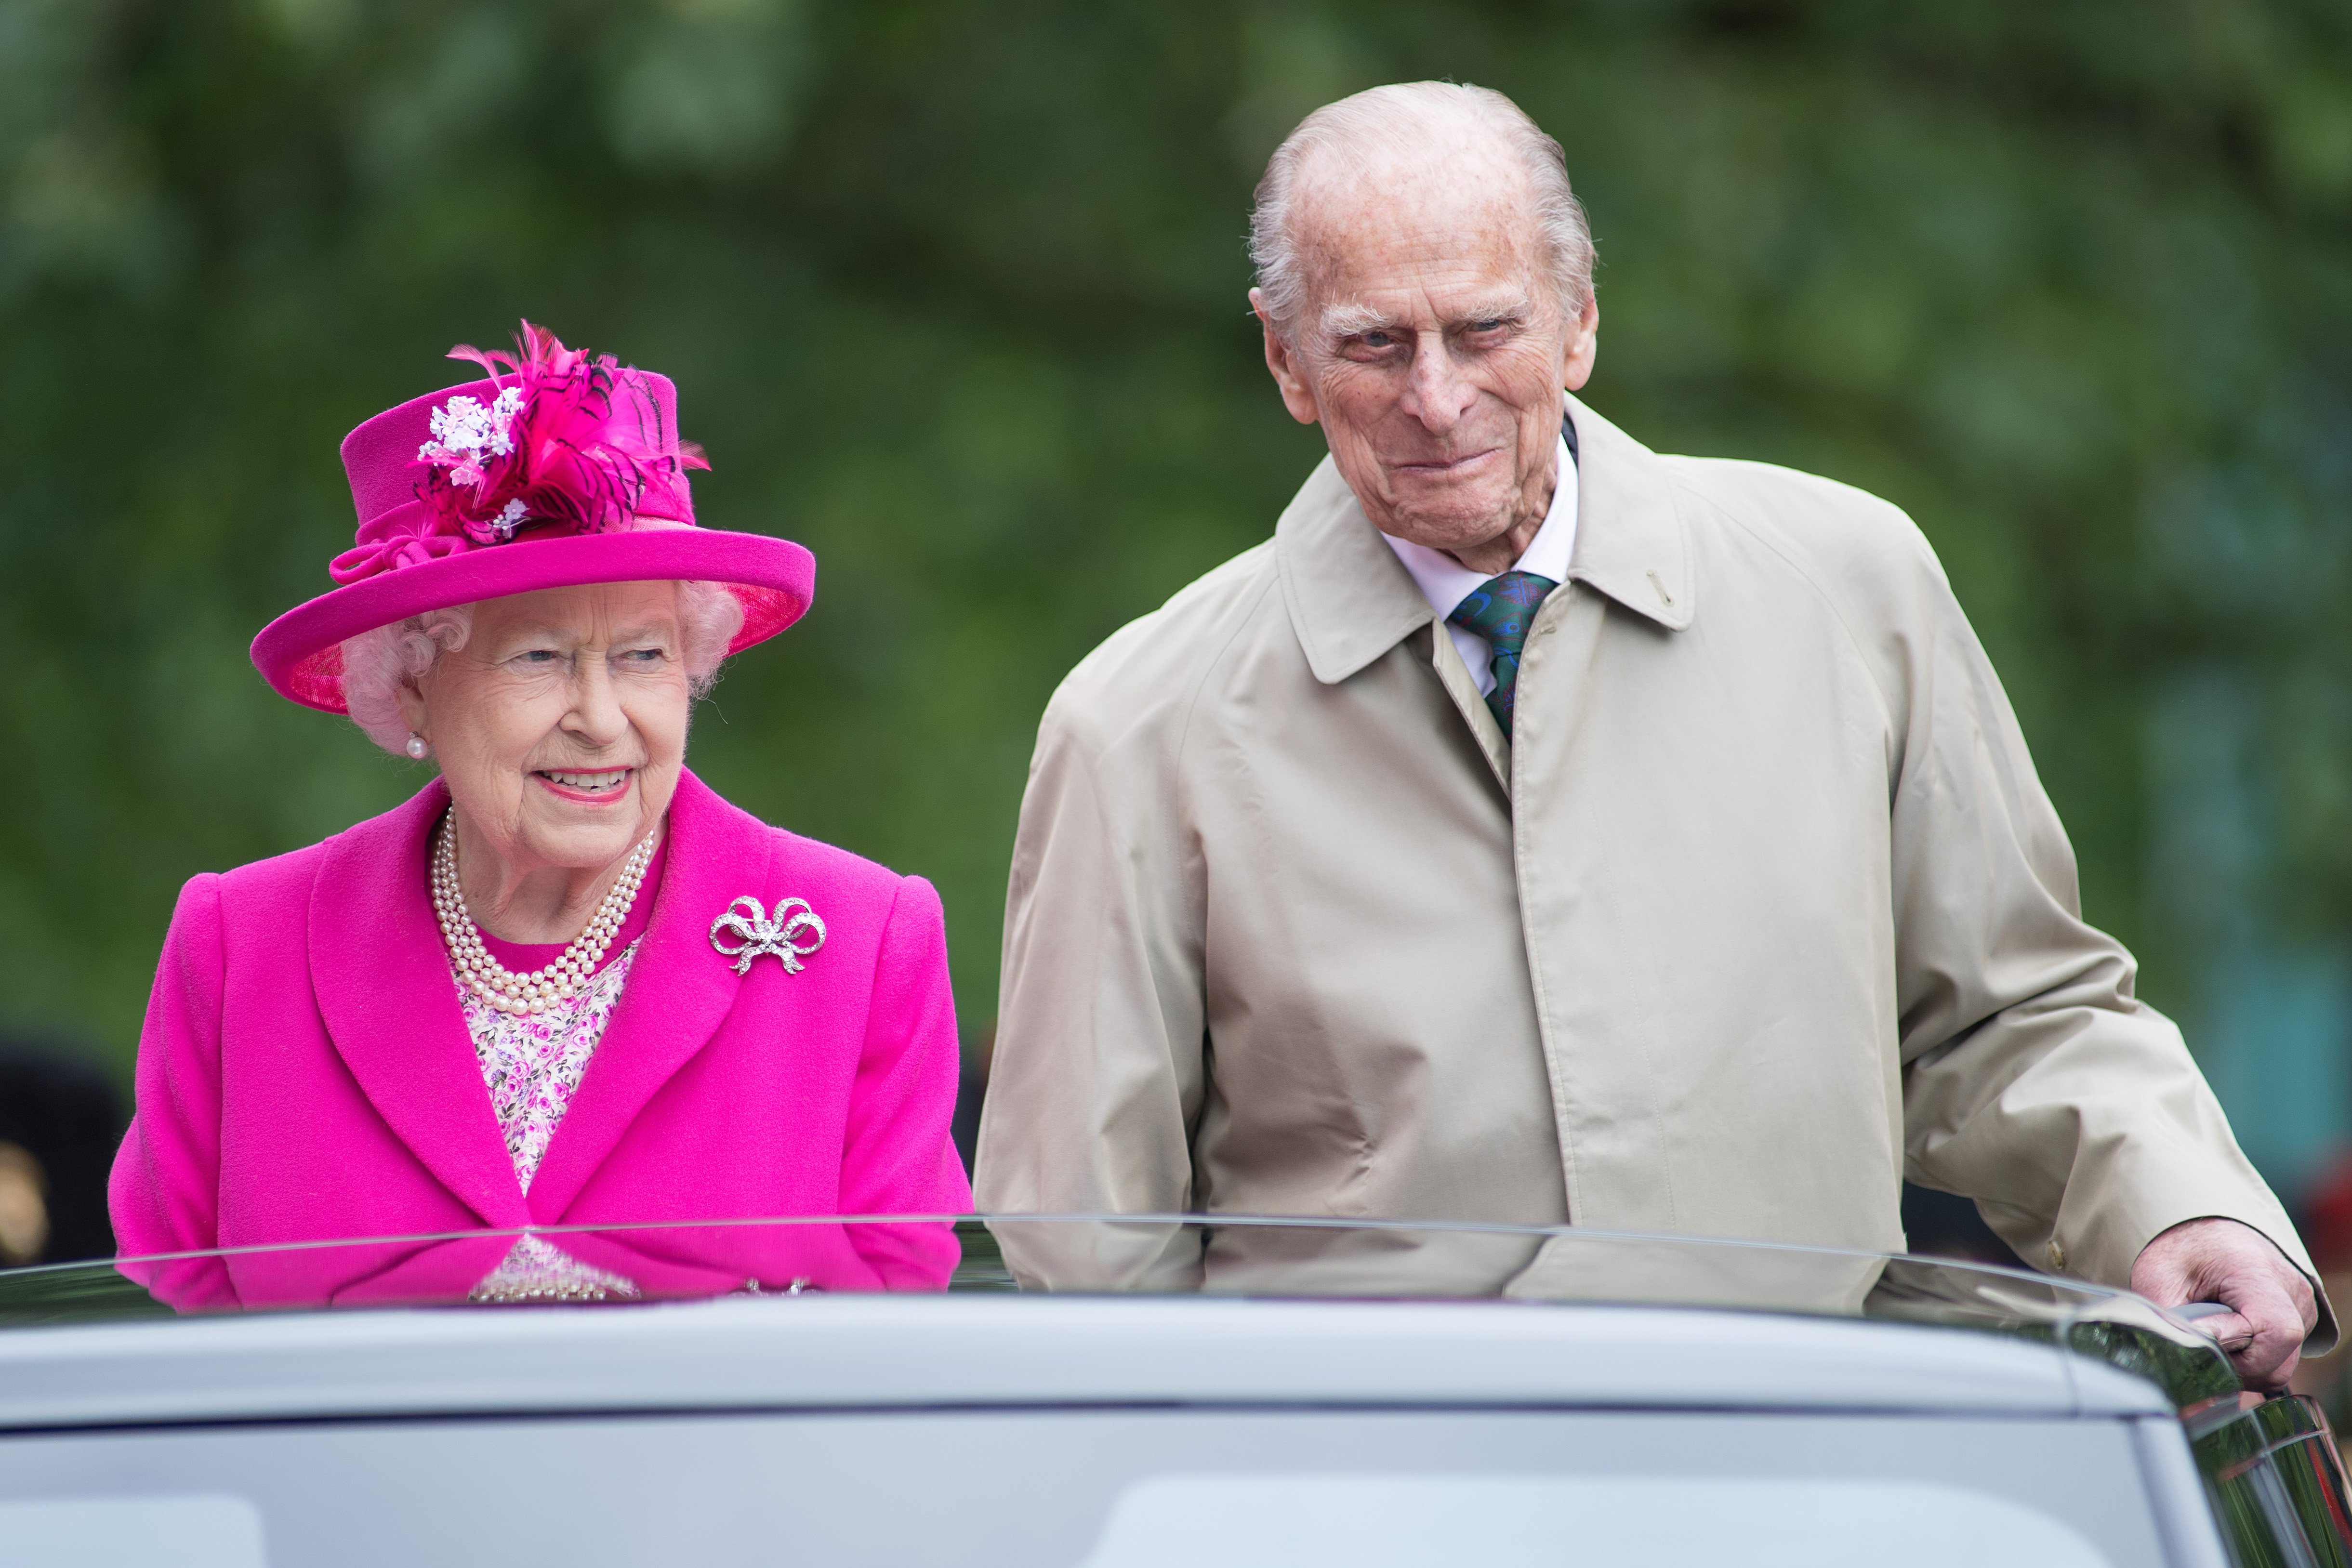 Queen Elizabeth II and Prince Philip, Duke of Edinburgh during "The Patron's Lunch" celebrations for The Queen's 90th birthday at The Mall on June 12, 2016, in London, England. | Source: Getty Images